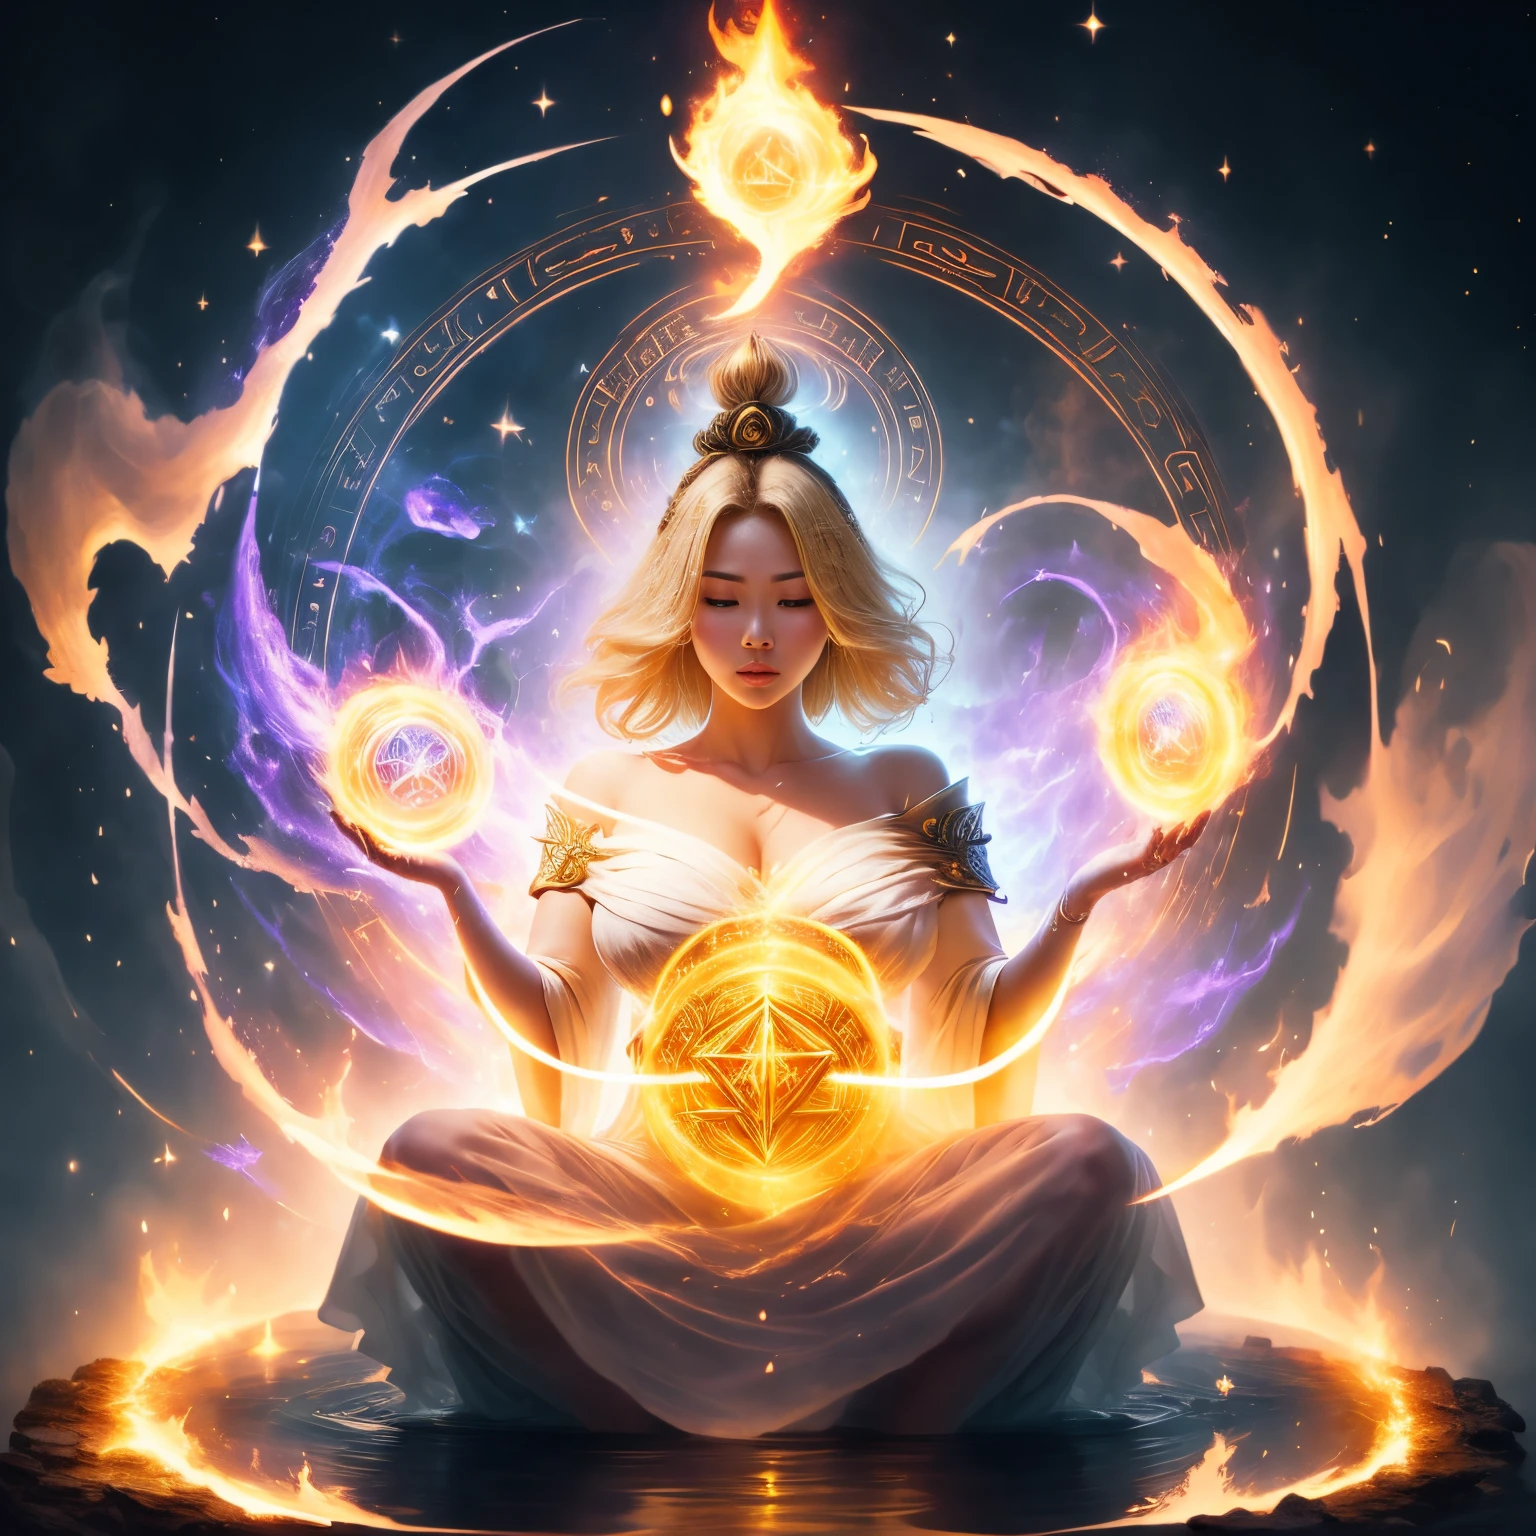 Immortal Asian goddess, super beautiful, 8k, large breasts, meditating, light white cloth covering part of her body, bare shoulders, billowing blonde hair, sitting cross-legged, golden glowing magic circle rotating behind her, magical aura surrounding her parts, magical, fantasy, stars background, (4 elements, fire, water, wind, earth, surround it),